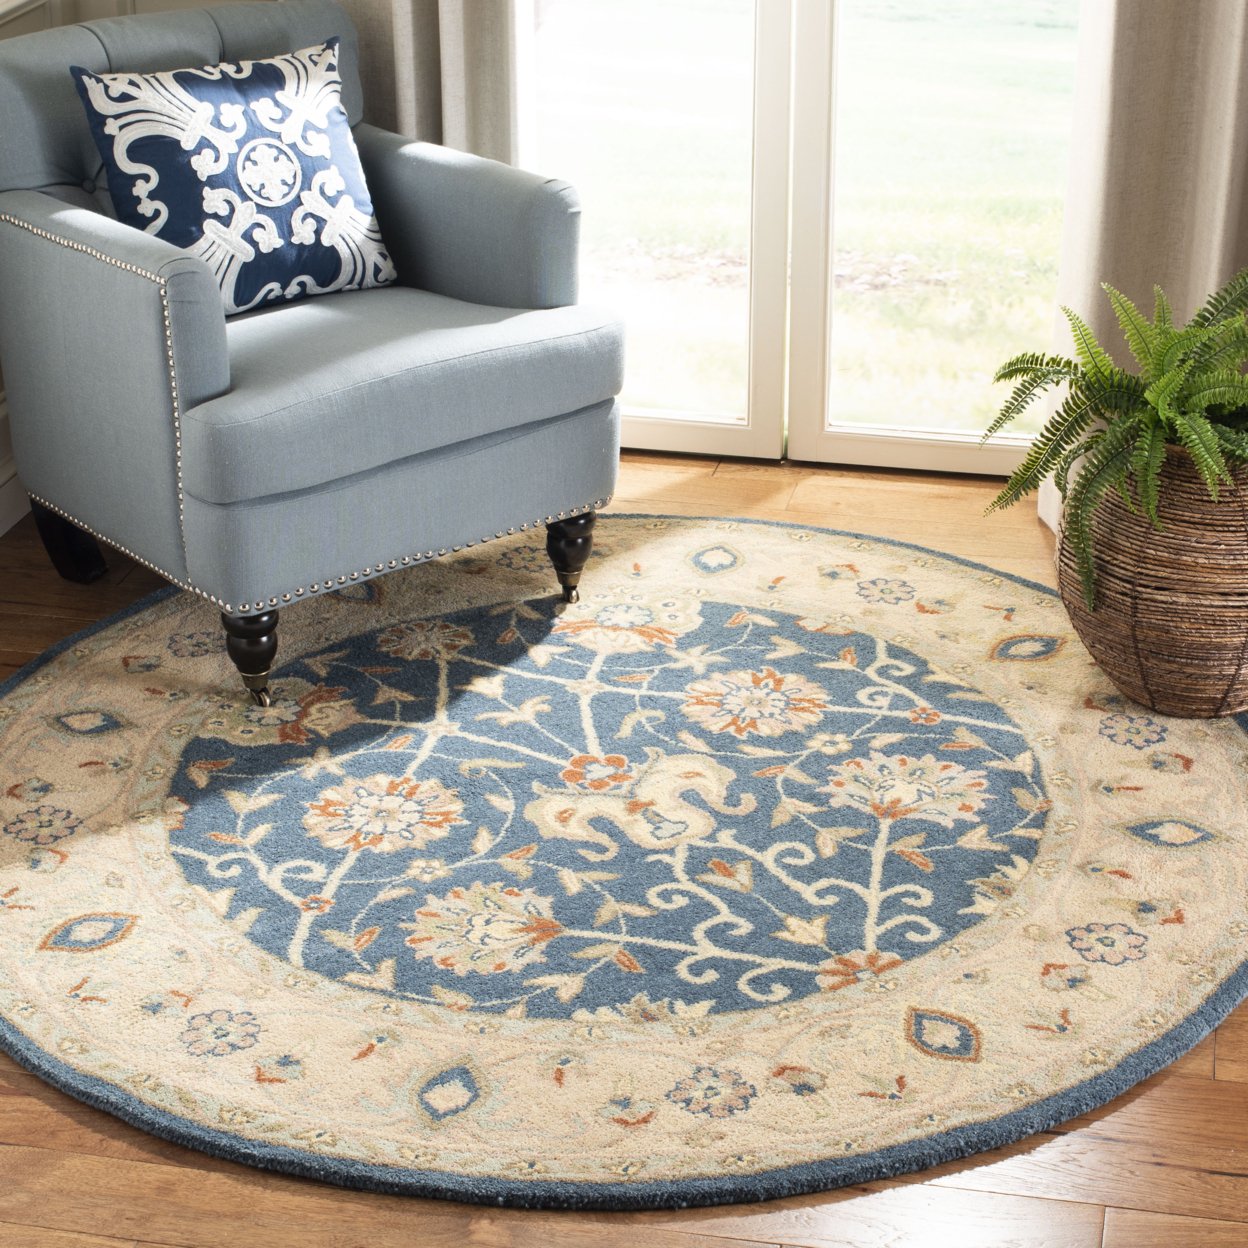 SAFAVIEH Antiquity Collection AT21E Handmade Blue Rug - 7' 6 X 9' 6 Oval